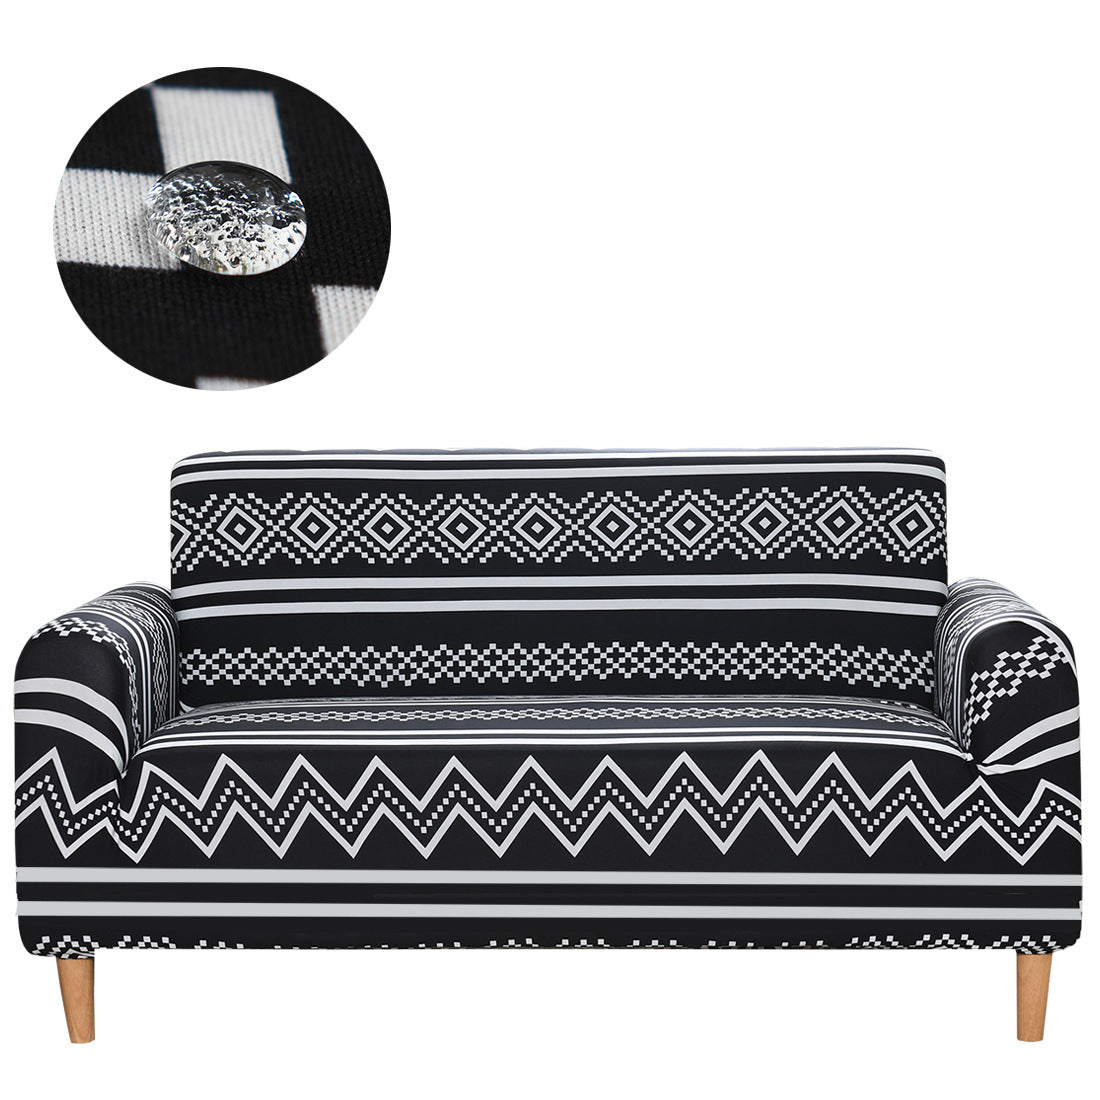 White horizontal white patterns in black background HomeStyle sofa cover